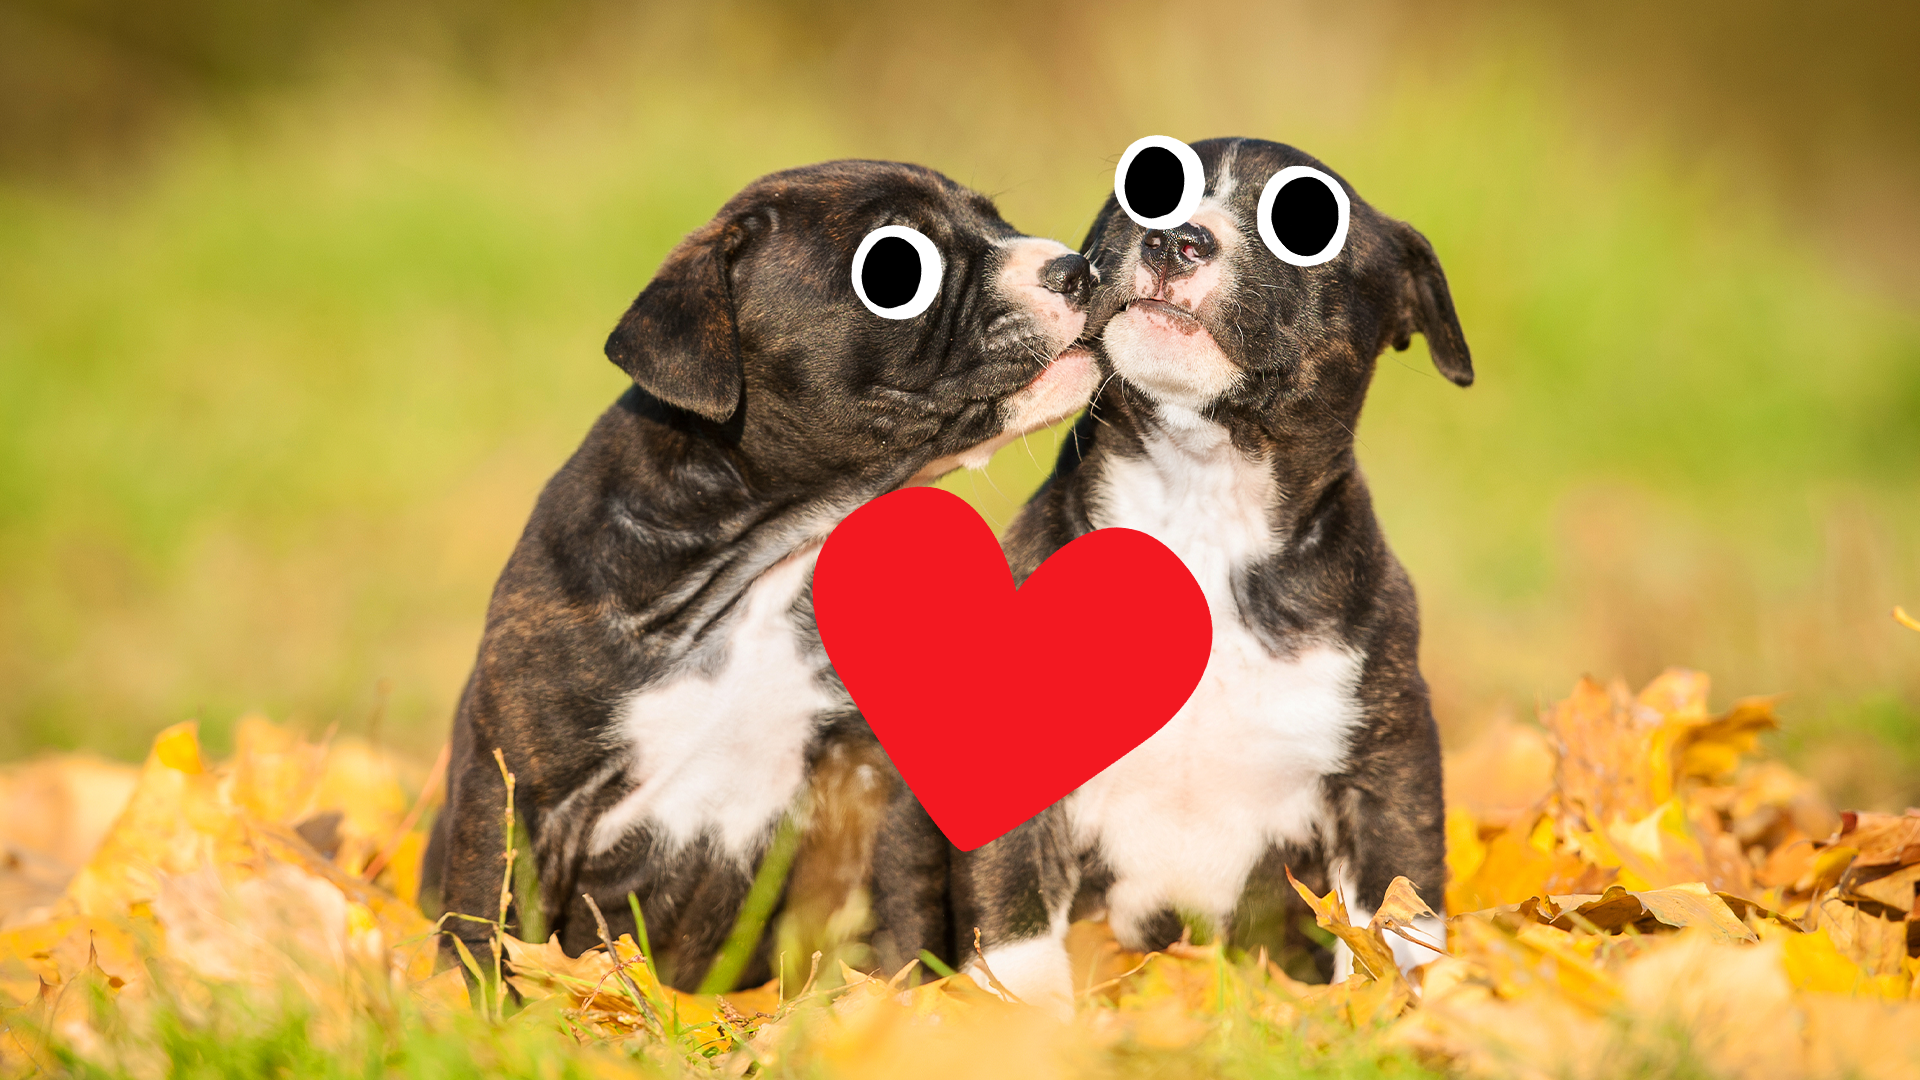 Two kissing puppies and a heart emoji